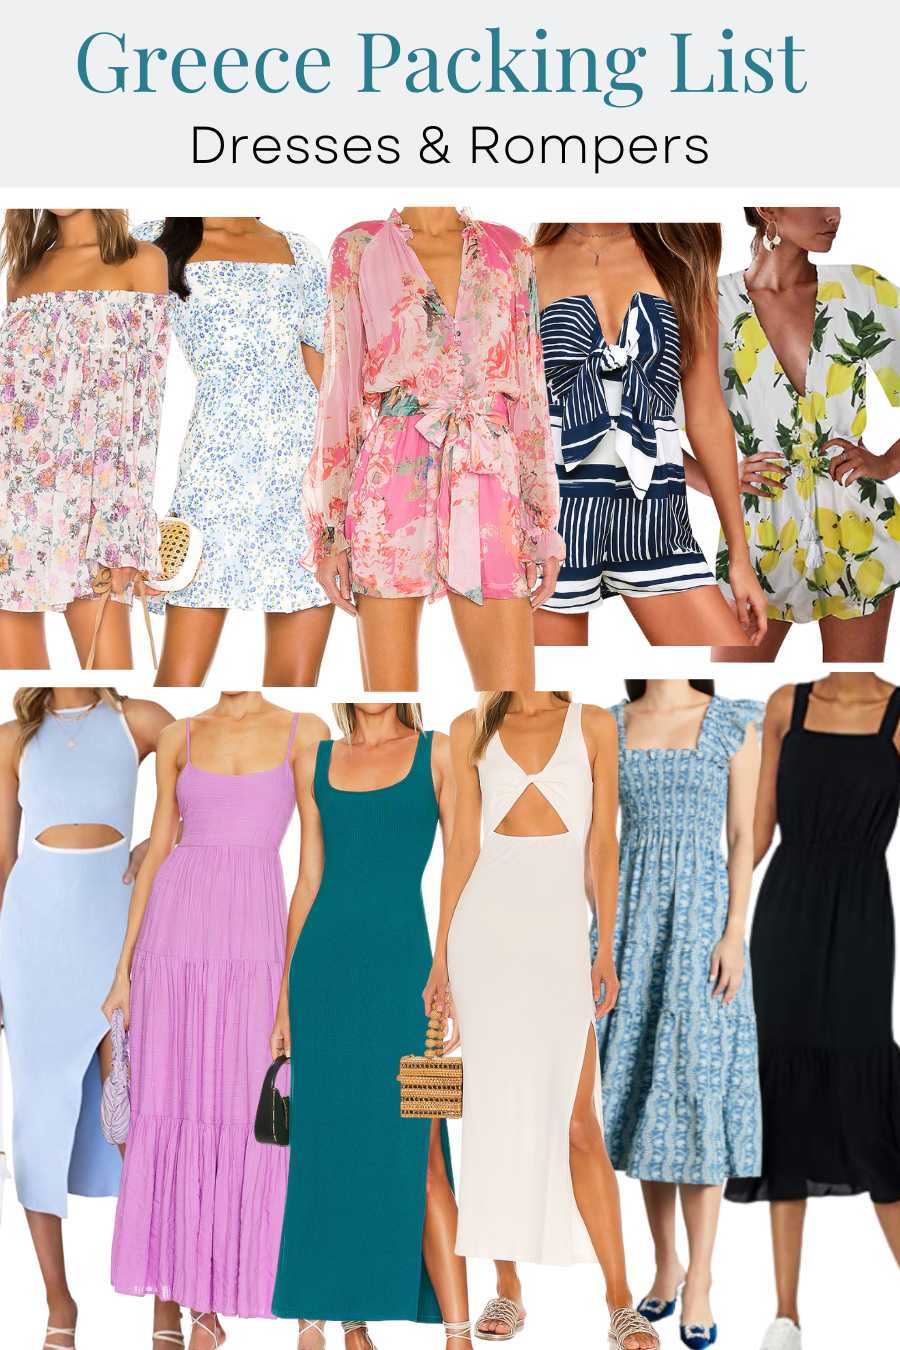 Greece packing list dresses and rompers